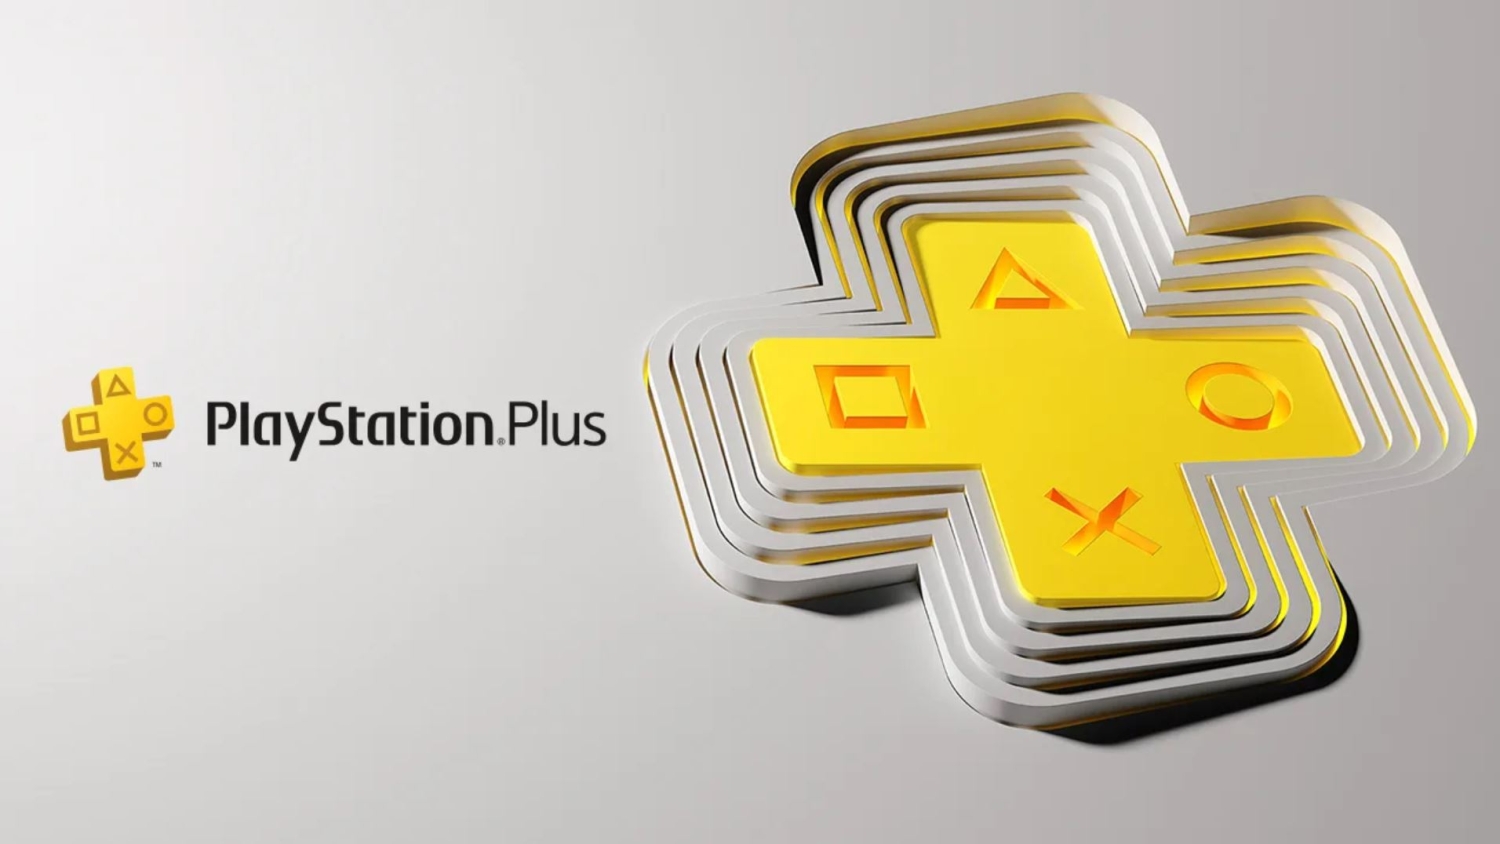 chap boom Fortære Analysis: Making sense of Sony's new PlayStation Plus conversion chart